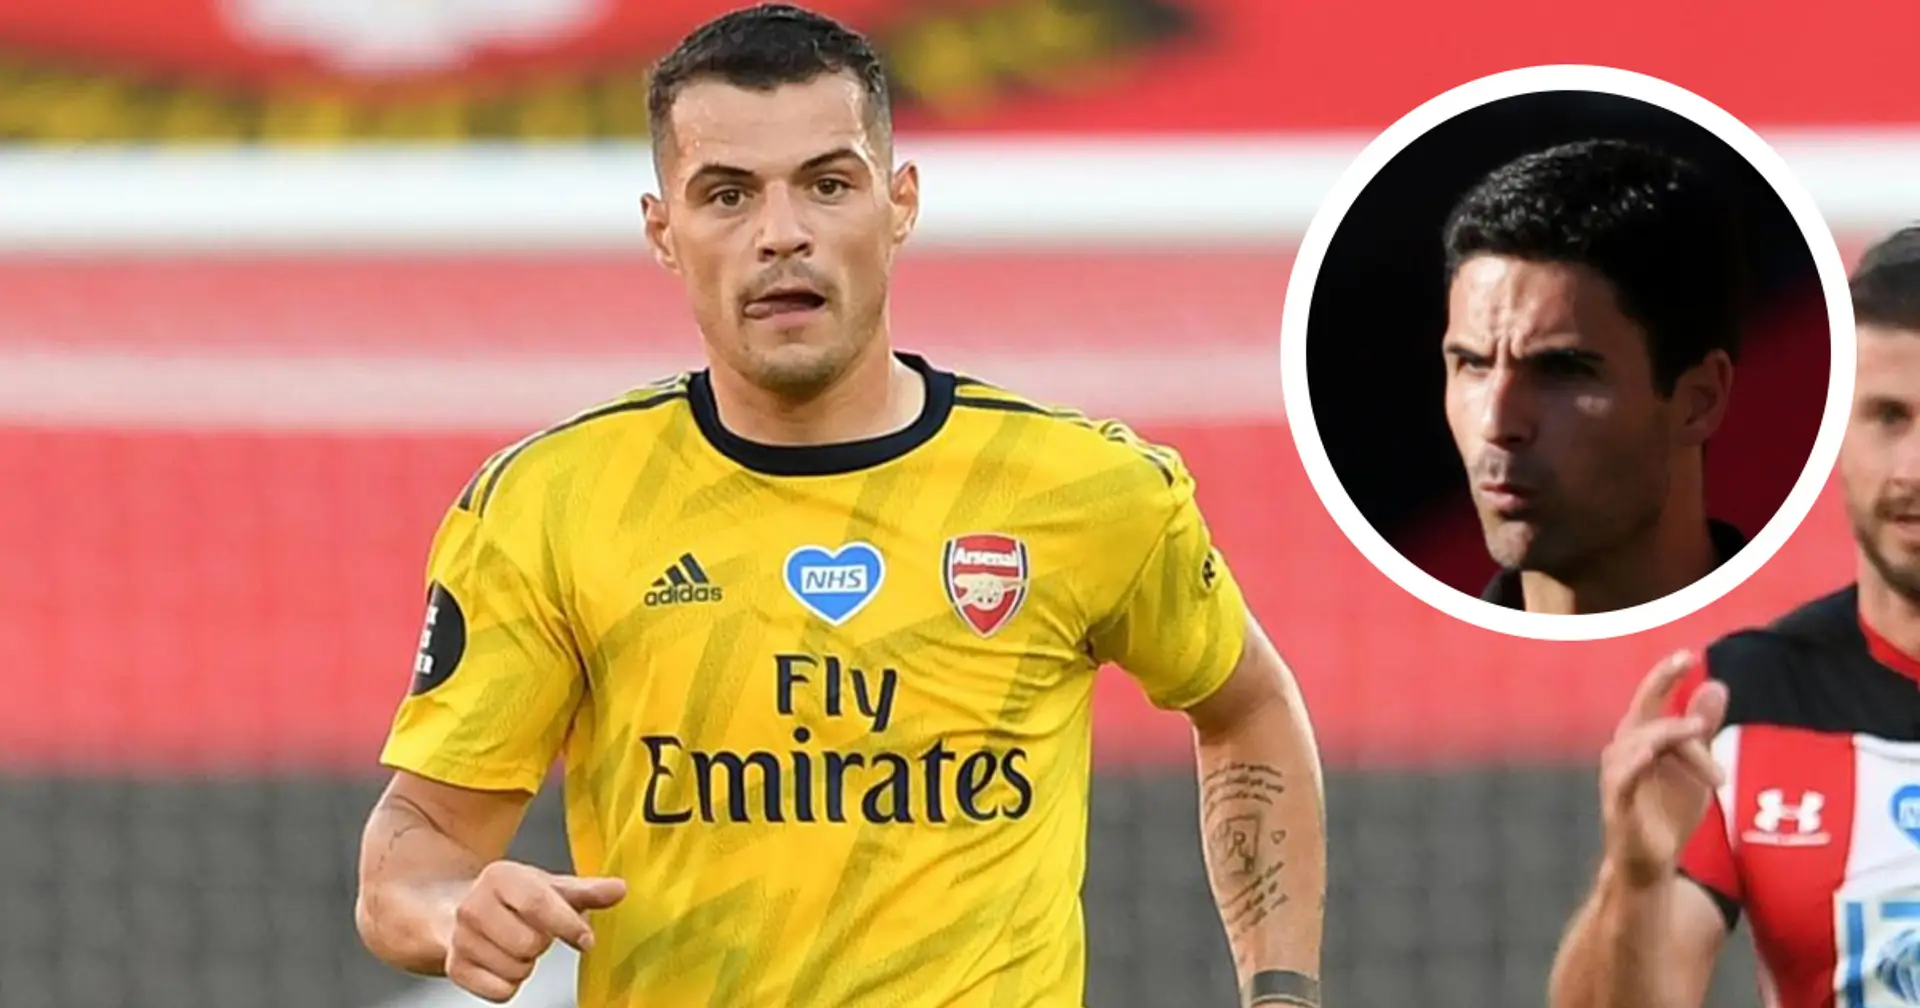 Mikel Arteta singles out Granit Xhaka for praise in So'ton victory as he explains why midfielder so important for this team